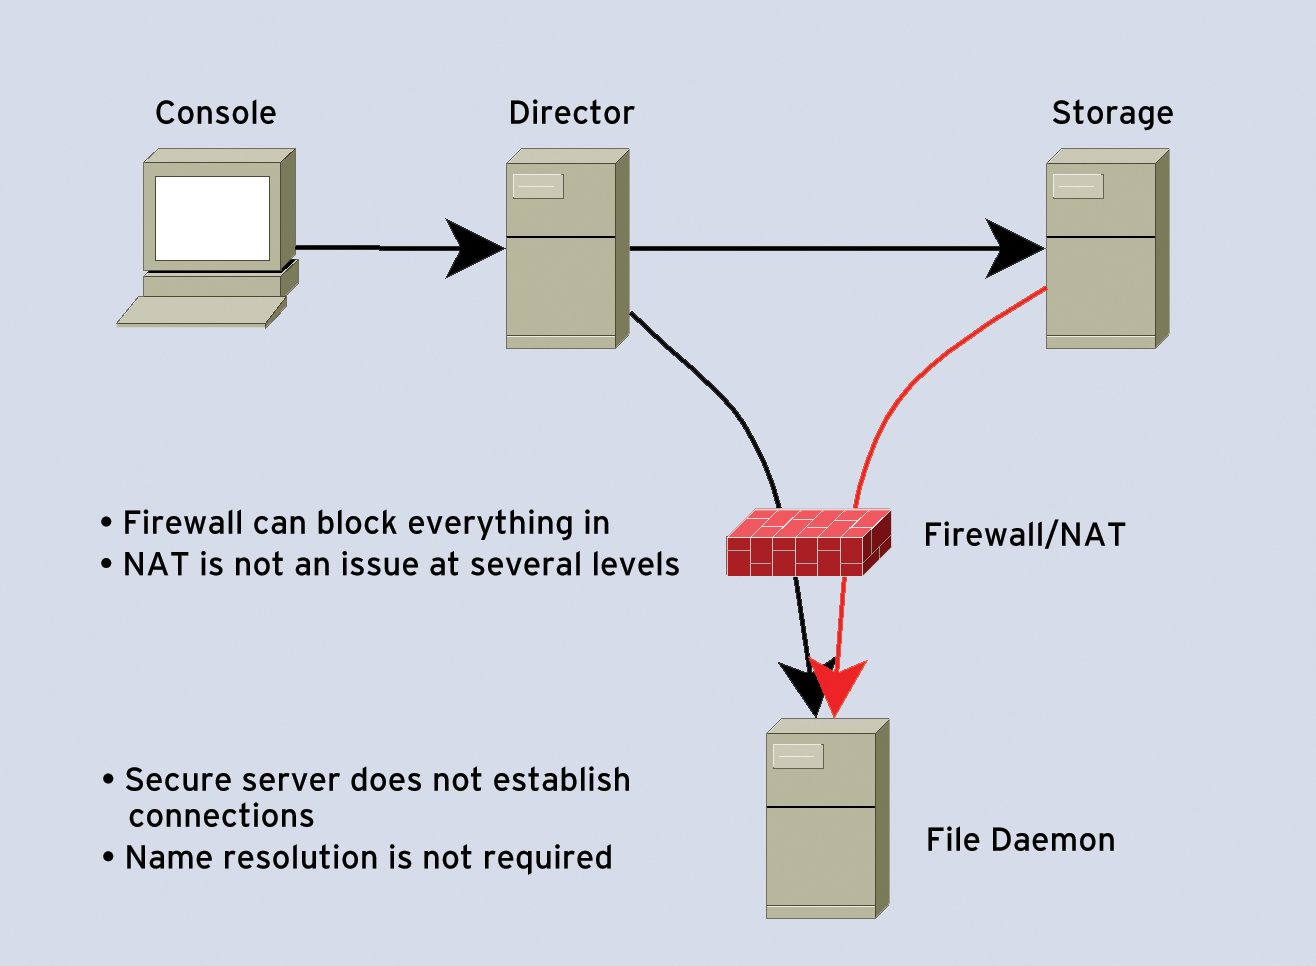 Passive client: The data connection is initiated by the Storage daemon to the client. 